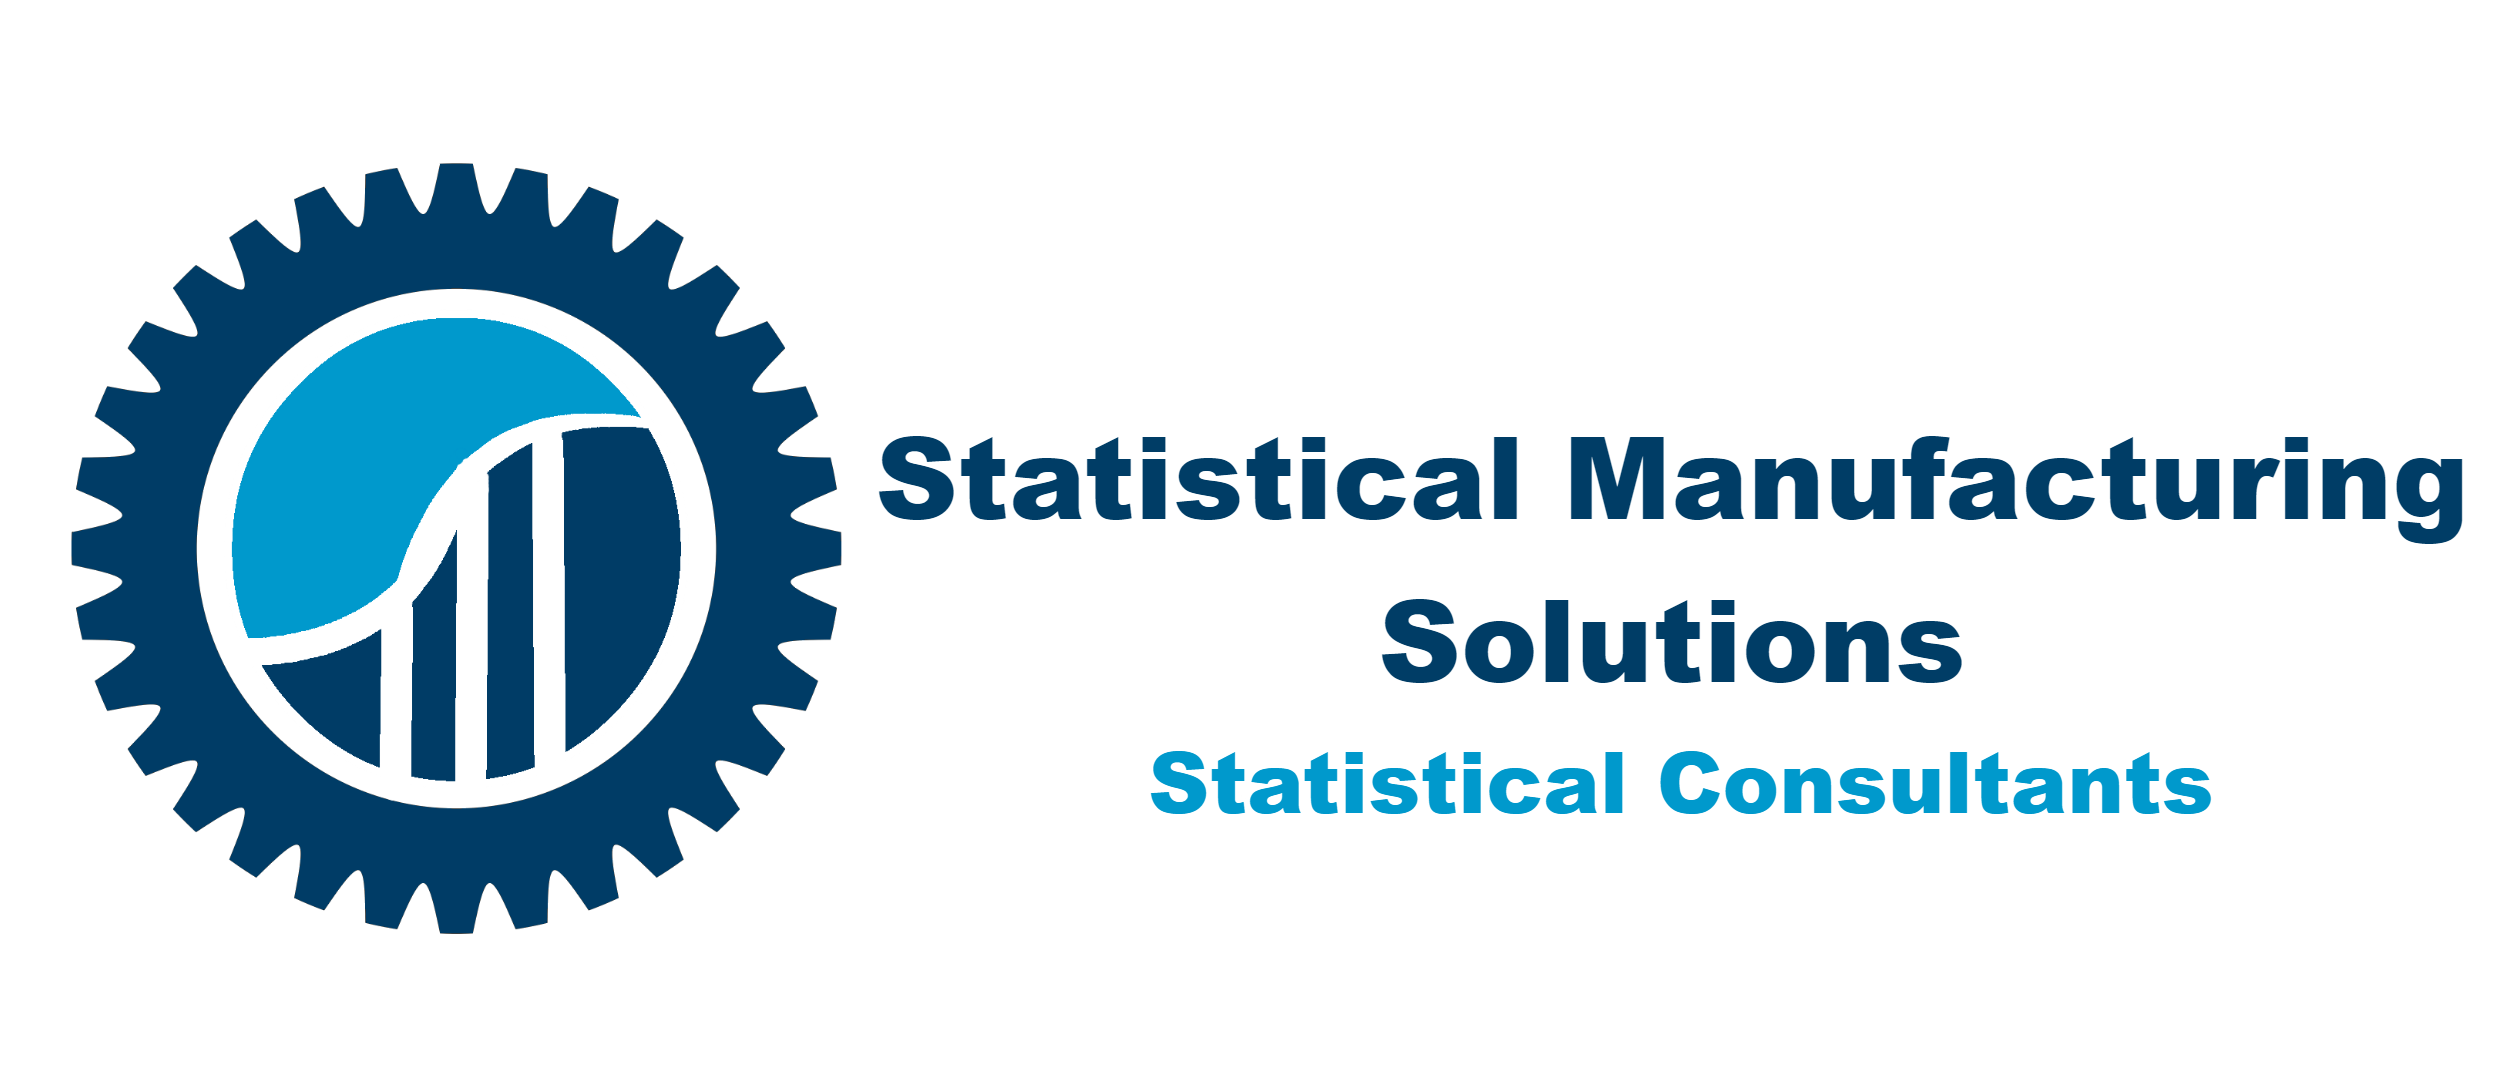 Statistical Manufacturing Solutions